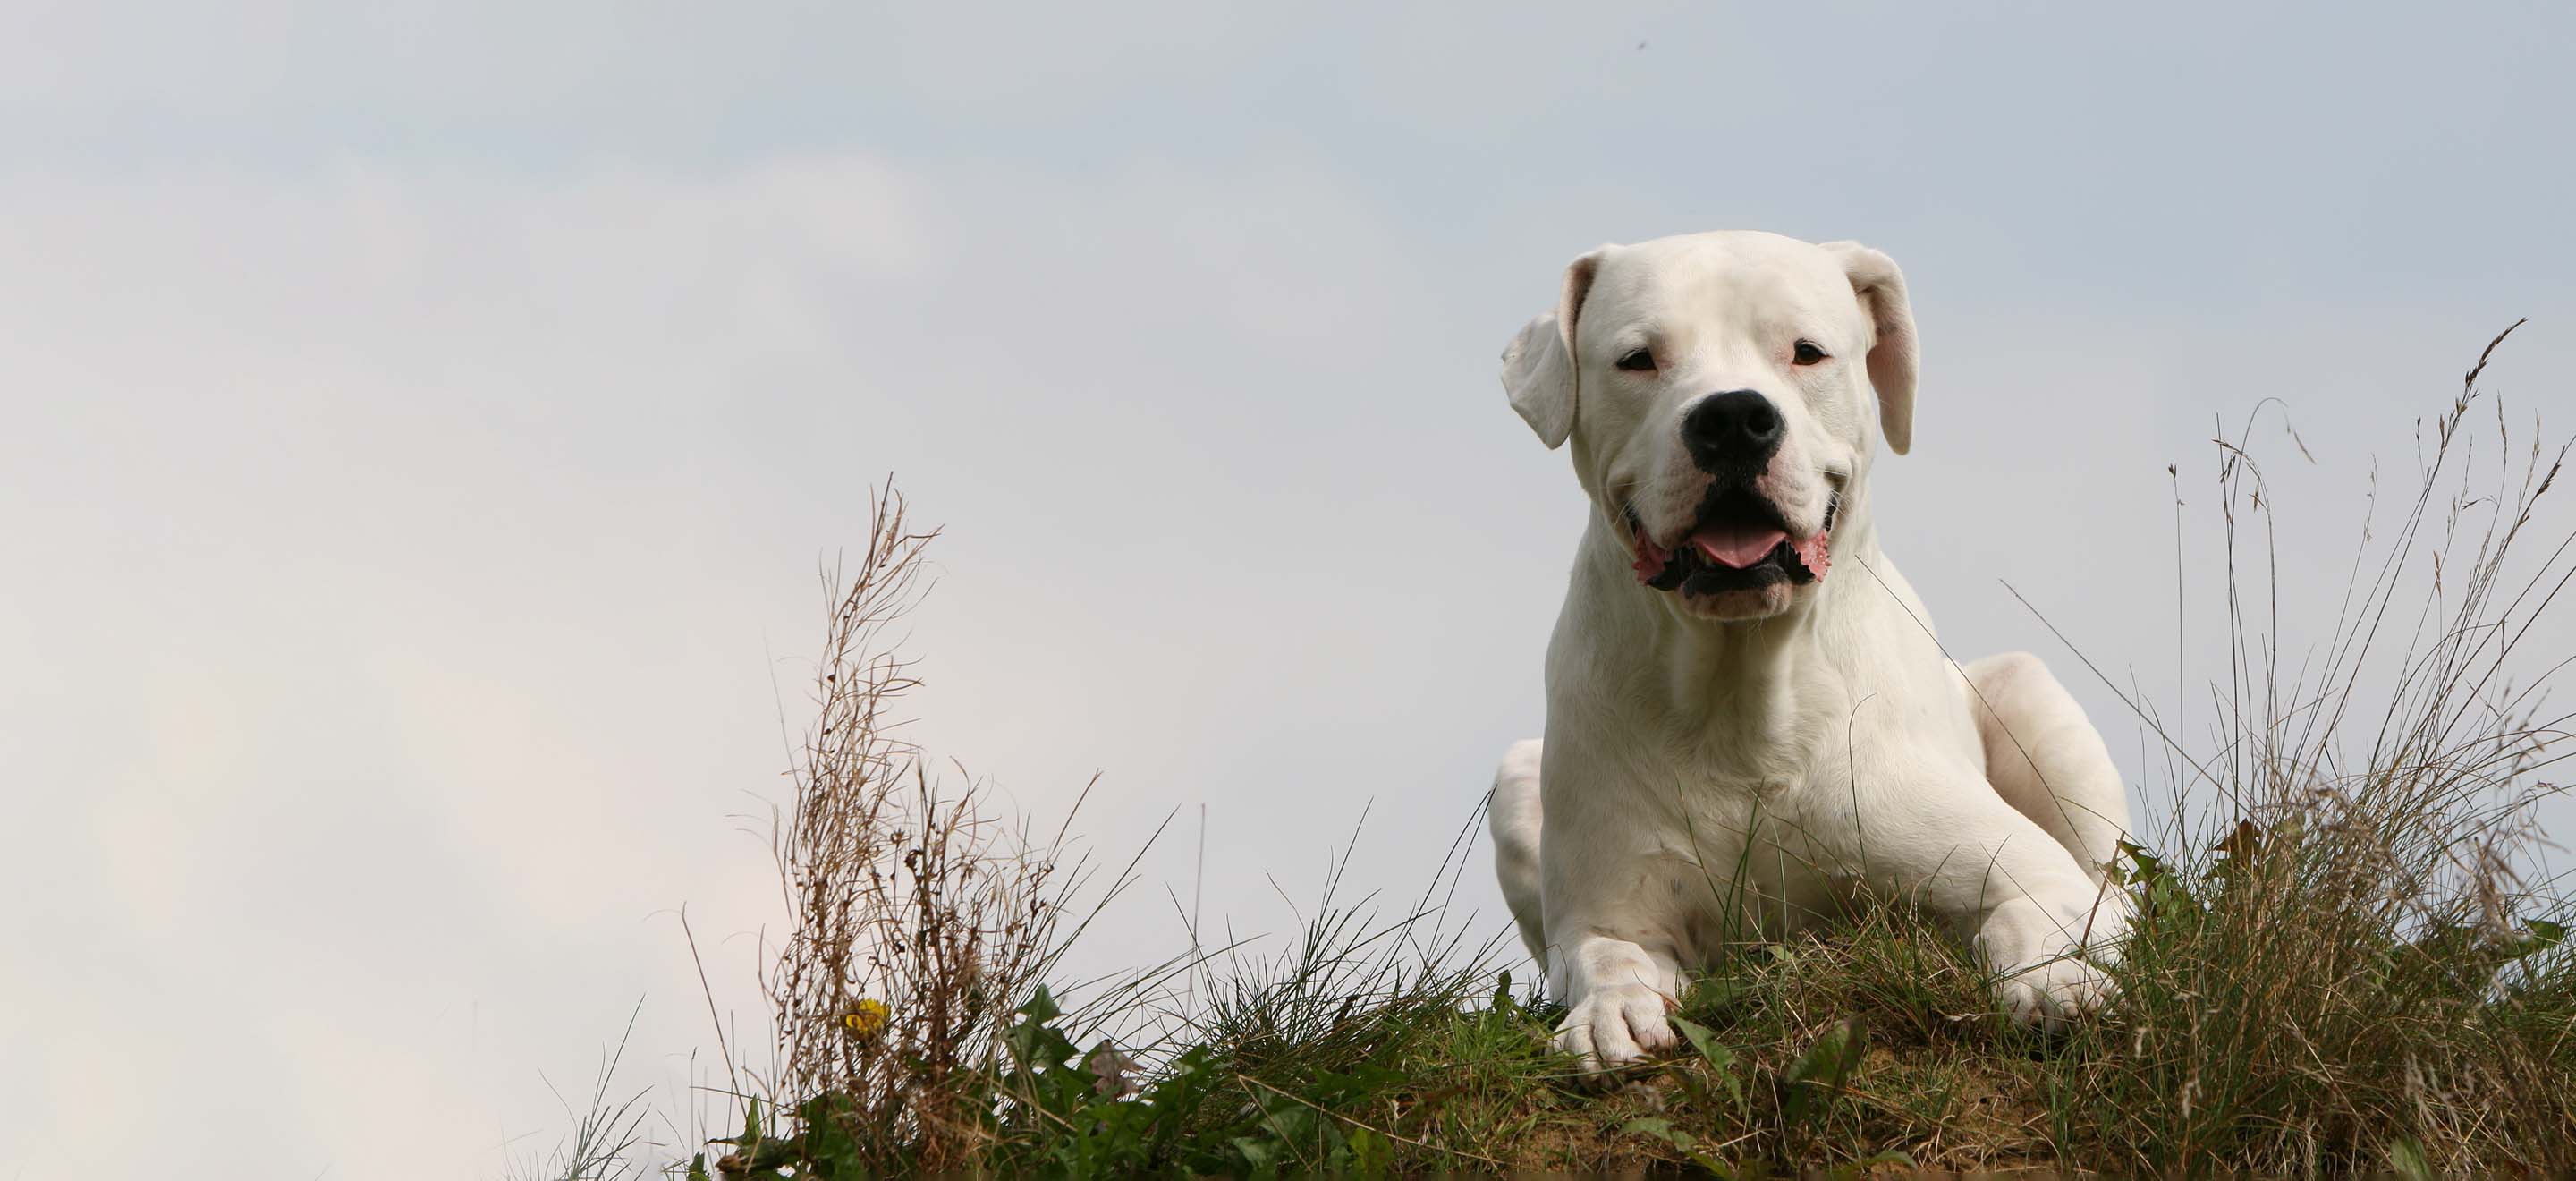 A Dogo Argentino sitting on a grassy hill image